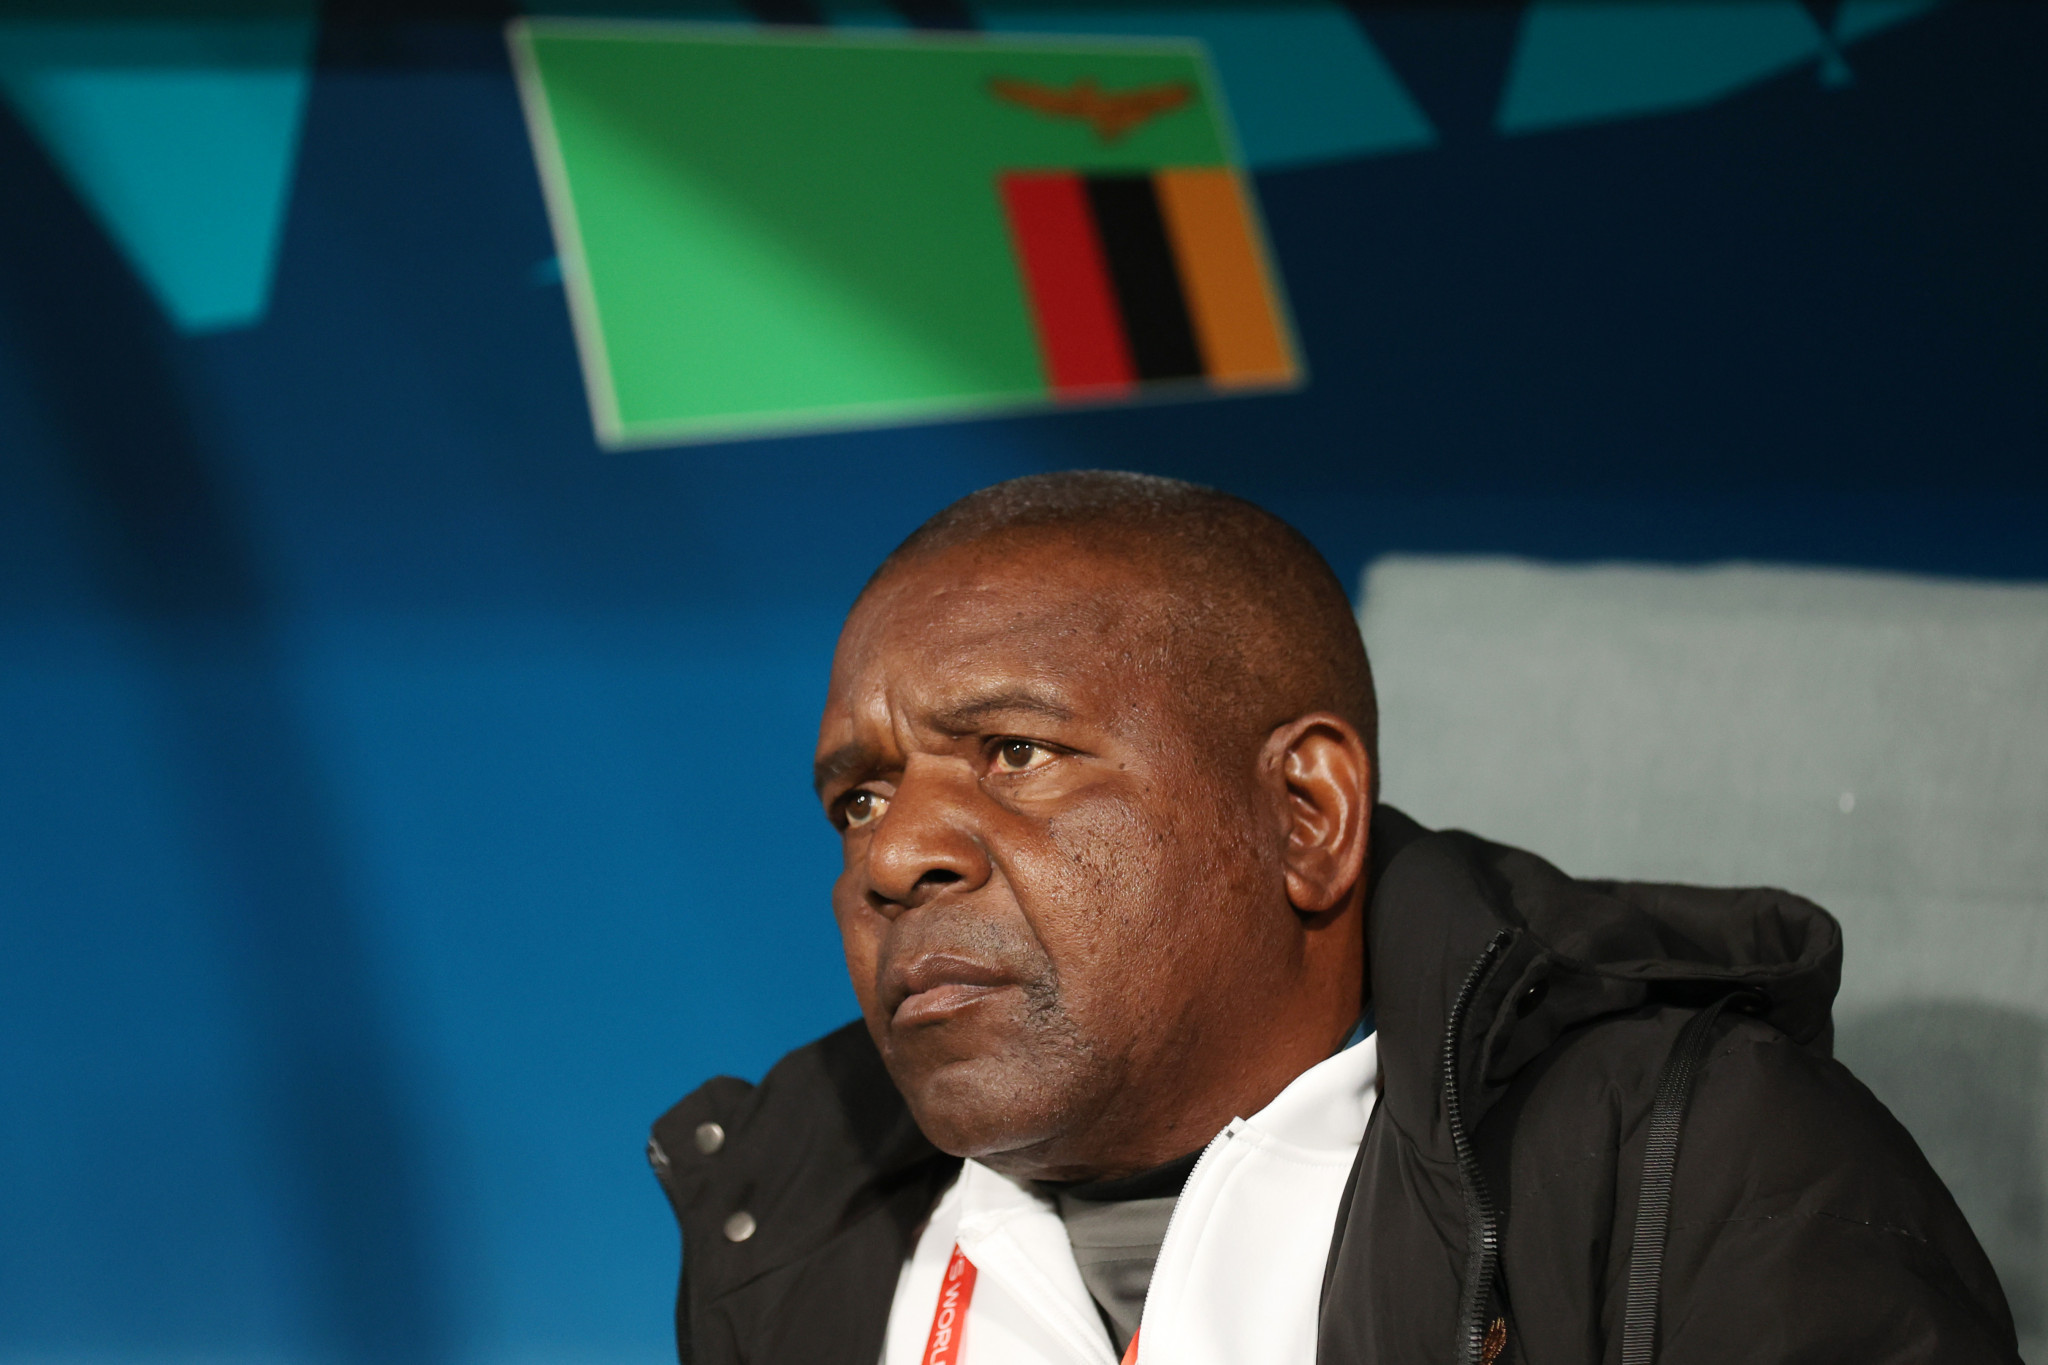 A media conference involving Zambian coach Bruce Mwape at the FIFA Women's World Cup was interrupted after he was asked about sexual abuse allegations ©Getty Images